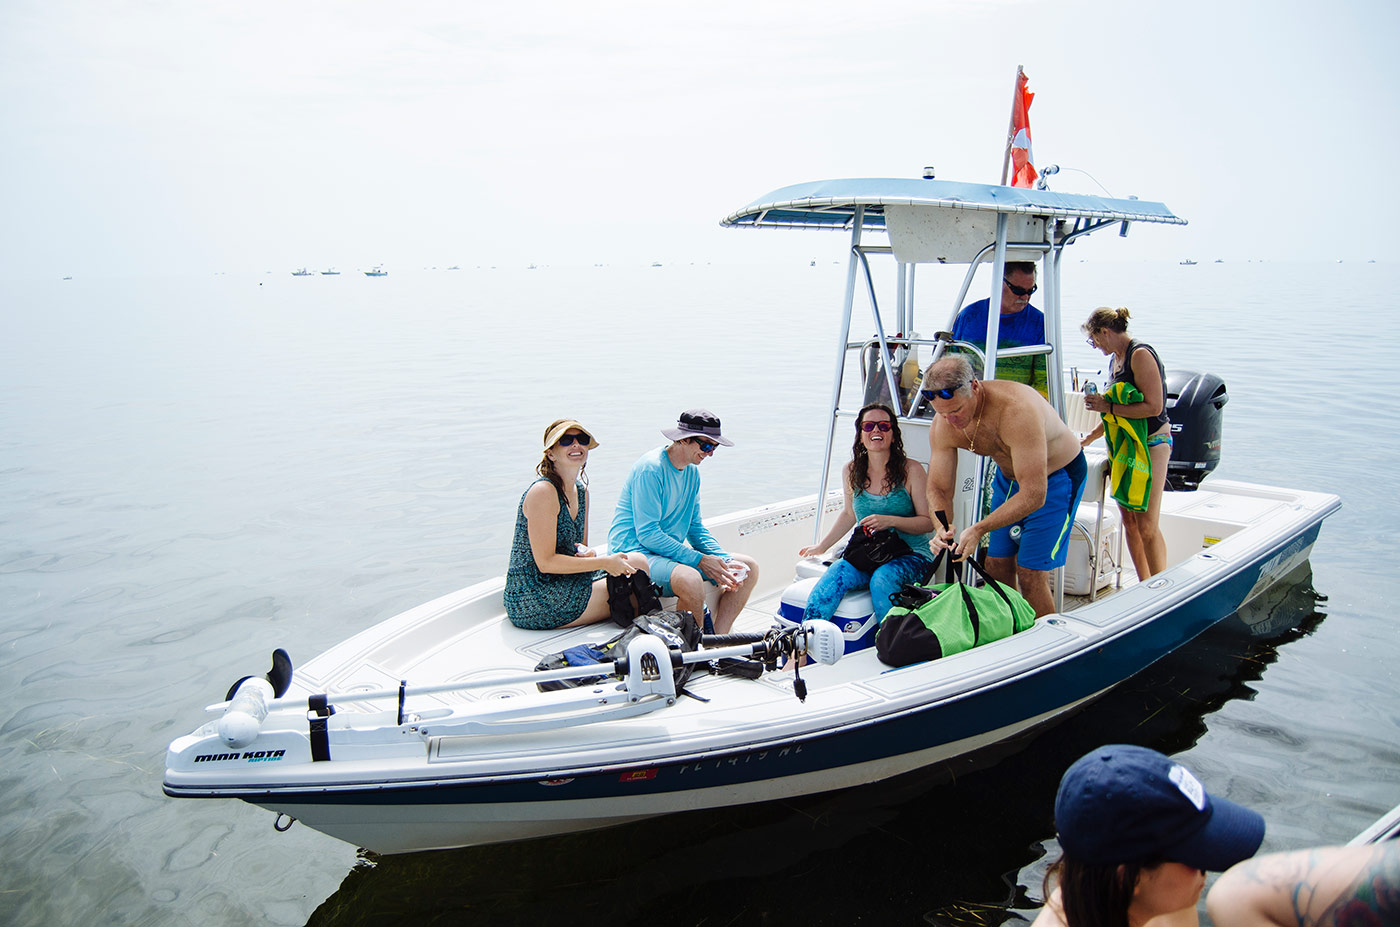 A day along the Gulf Coast with Rabbit Hole. Several people sit and or stand in a small boat, floating in the gulf of Mexico. The background is hazy. 